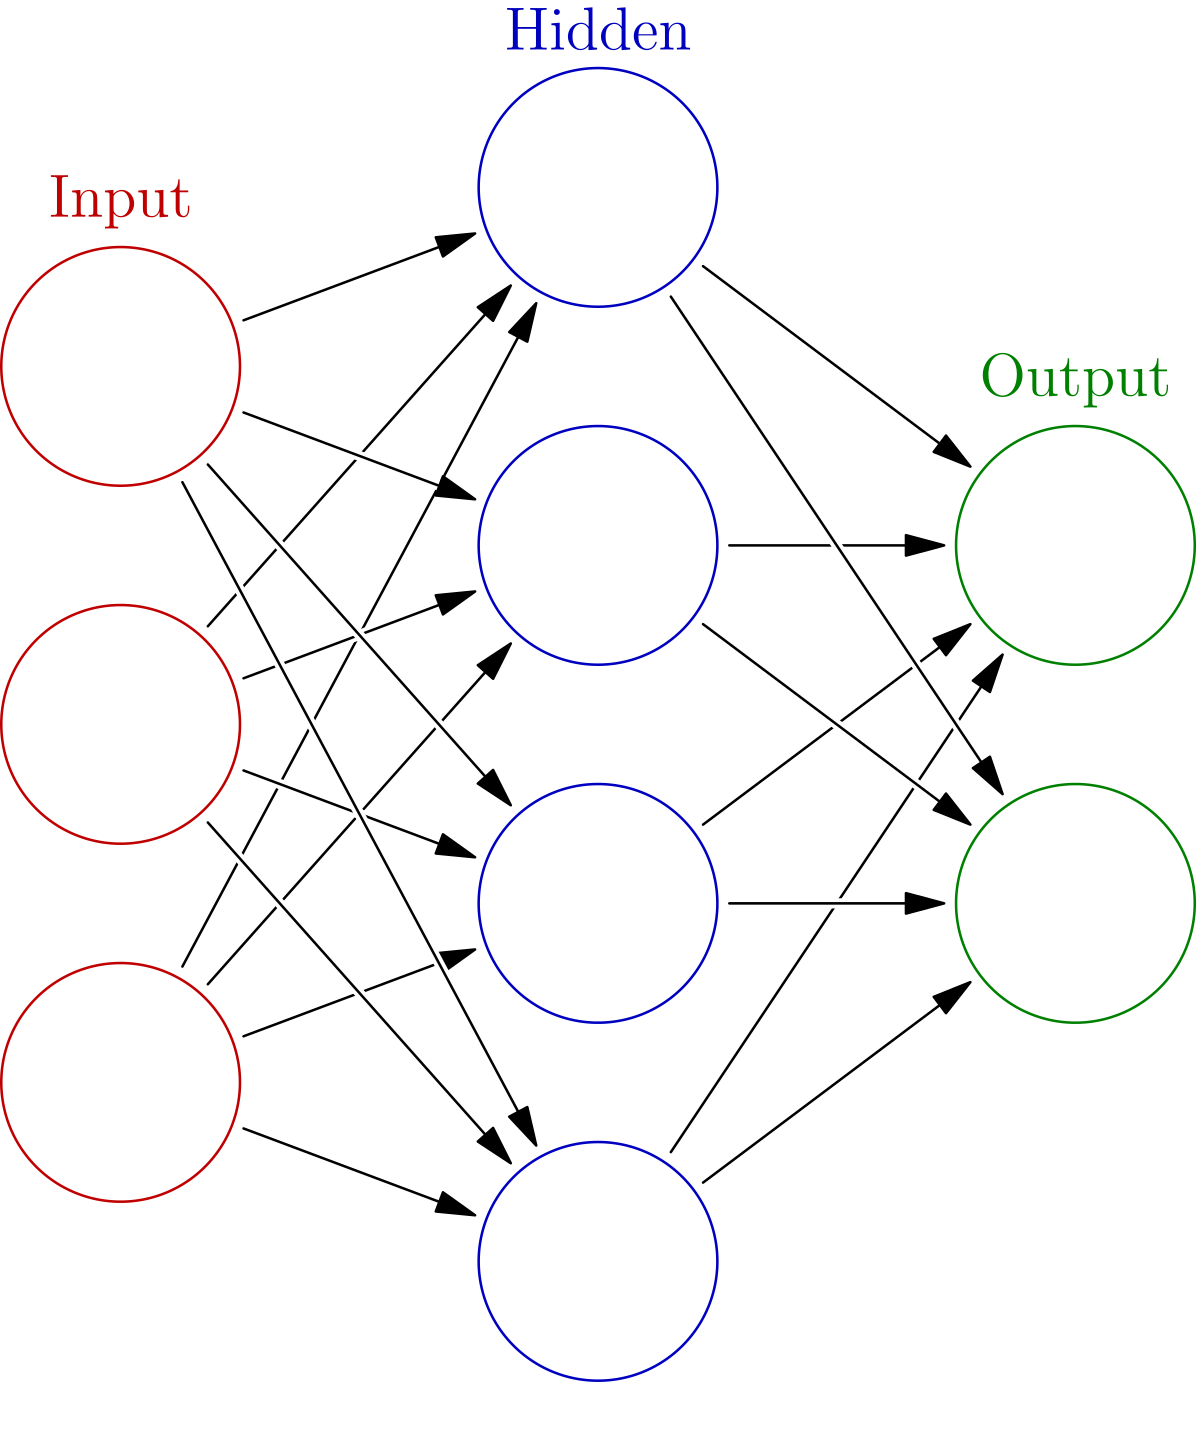 An image of a neural network